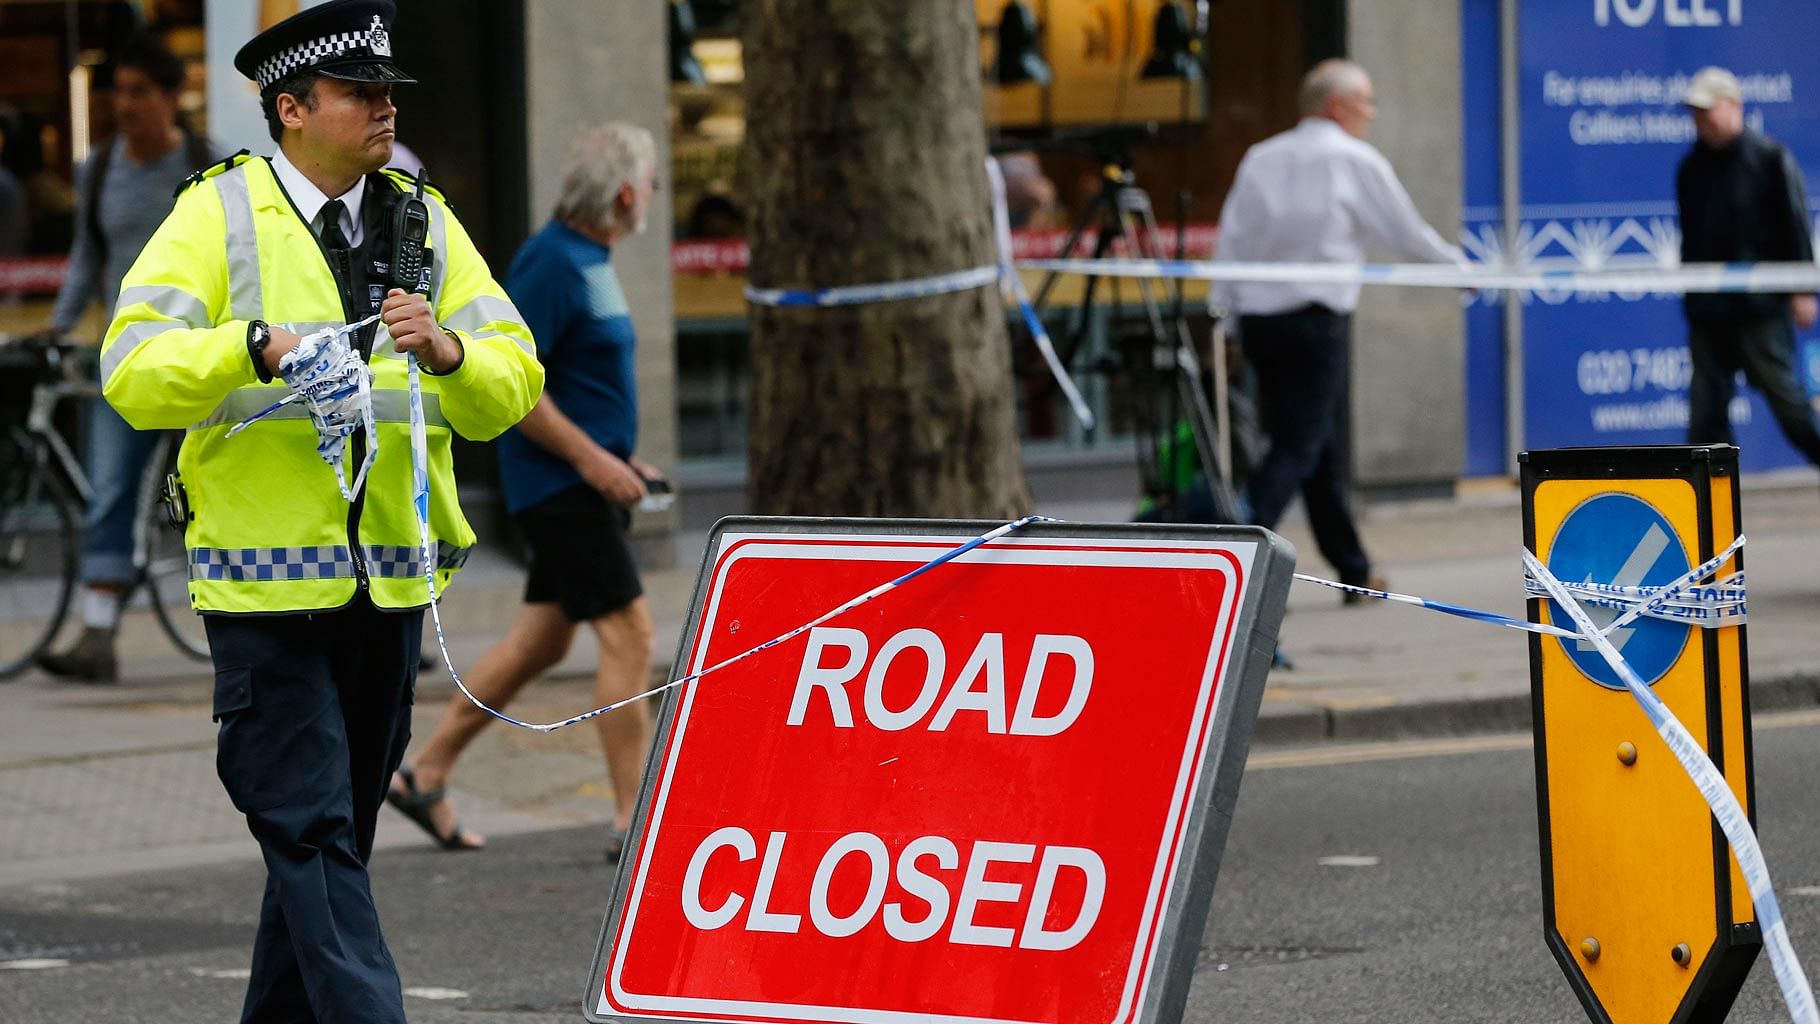 Police clear barricade tape from the scene of a knife attack near Russell Square in London, Thursday, on August 4, 2016. (Photo: AP)